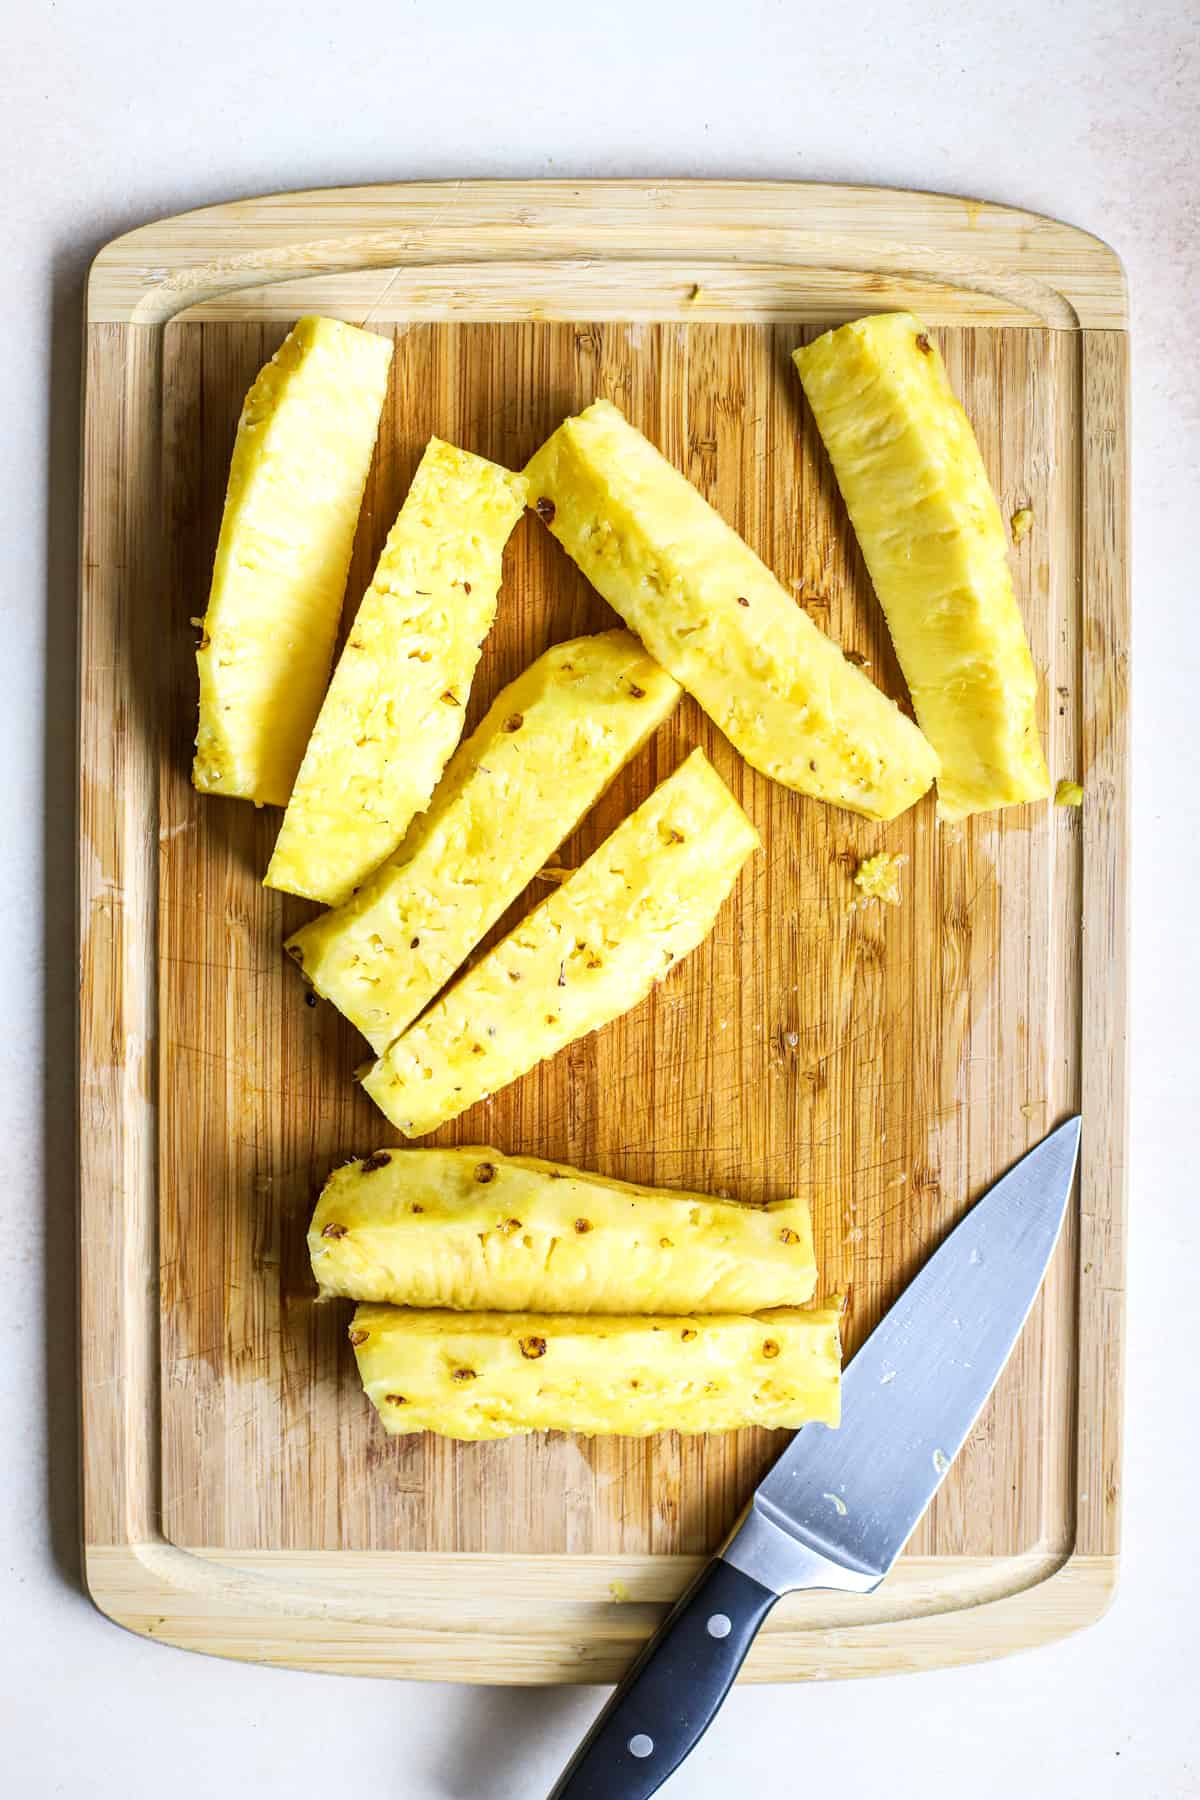 Eight long pineapple slices on bamboo cutting board next to chef's knife